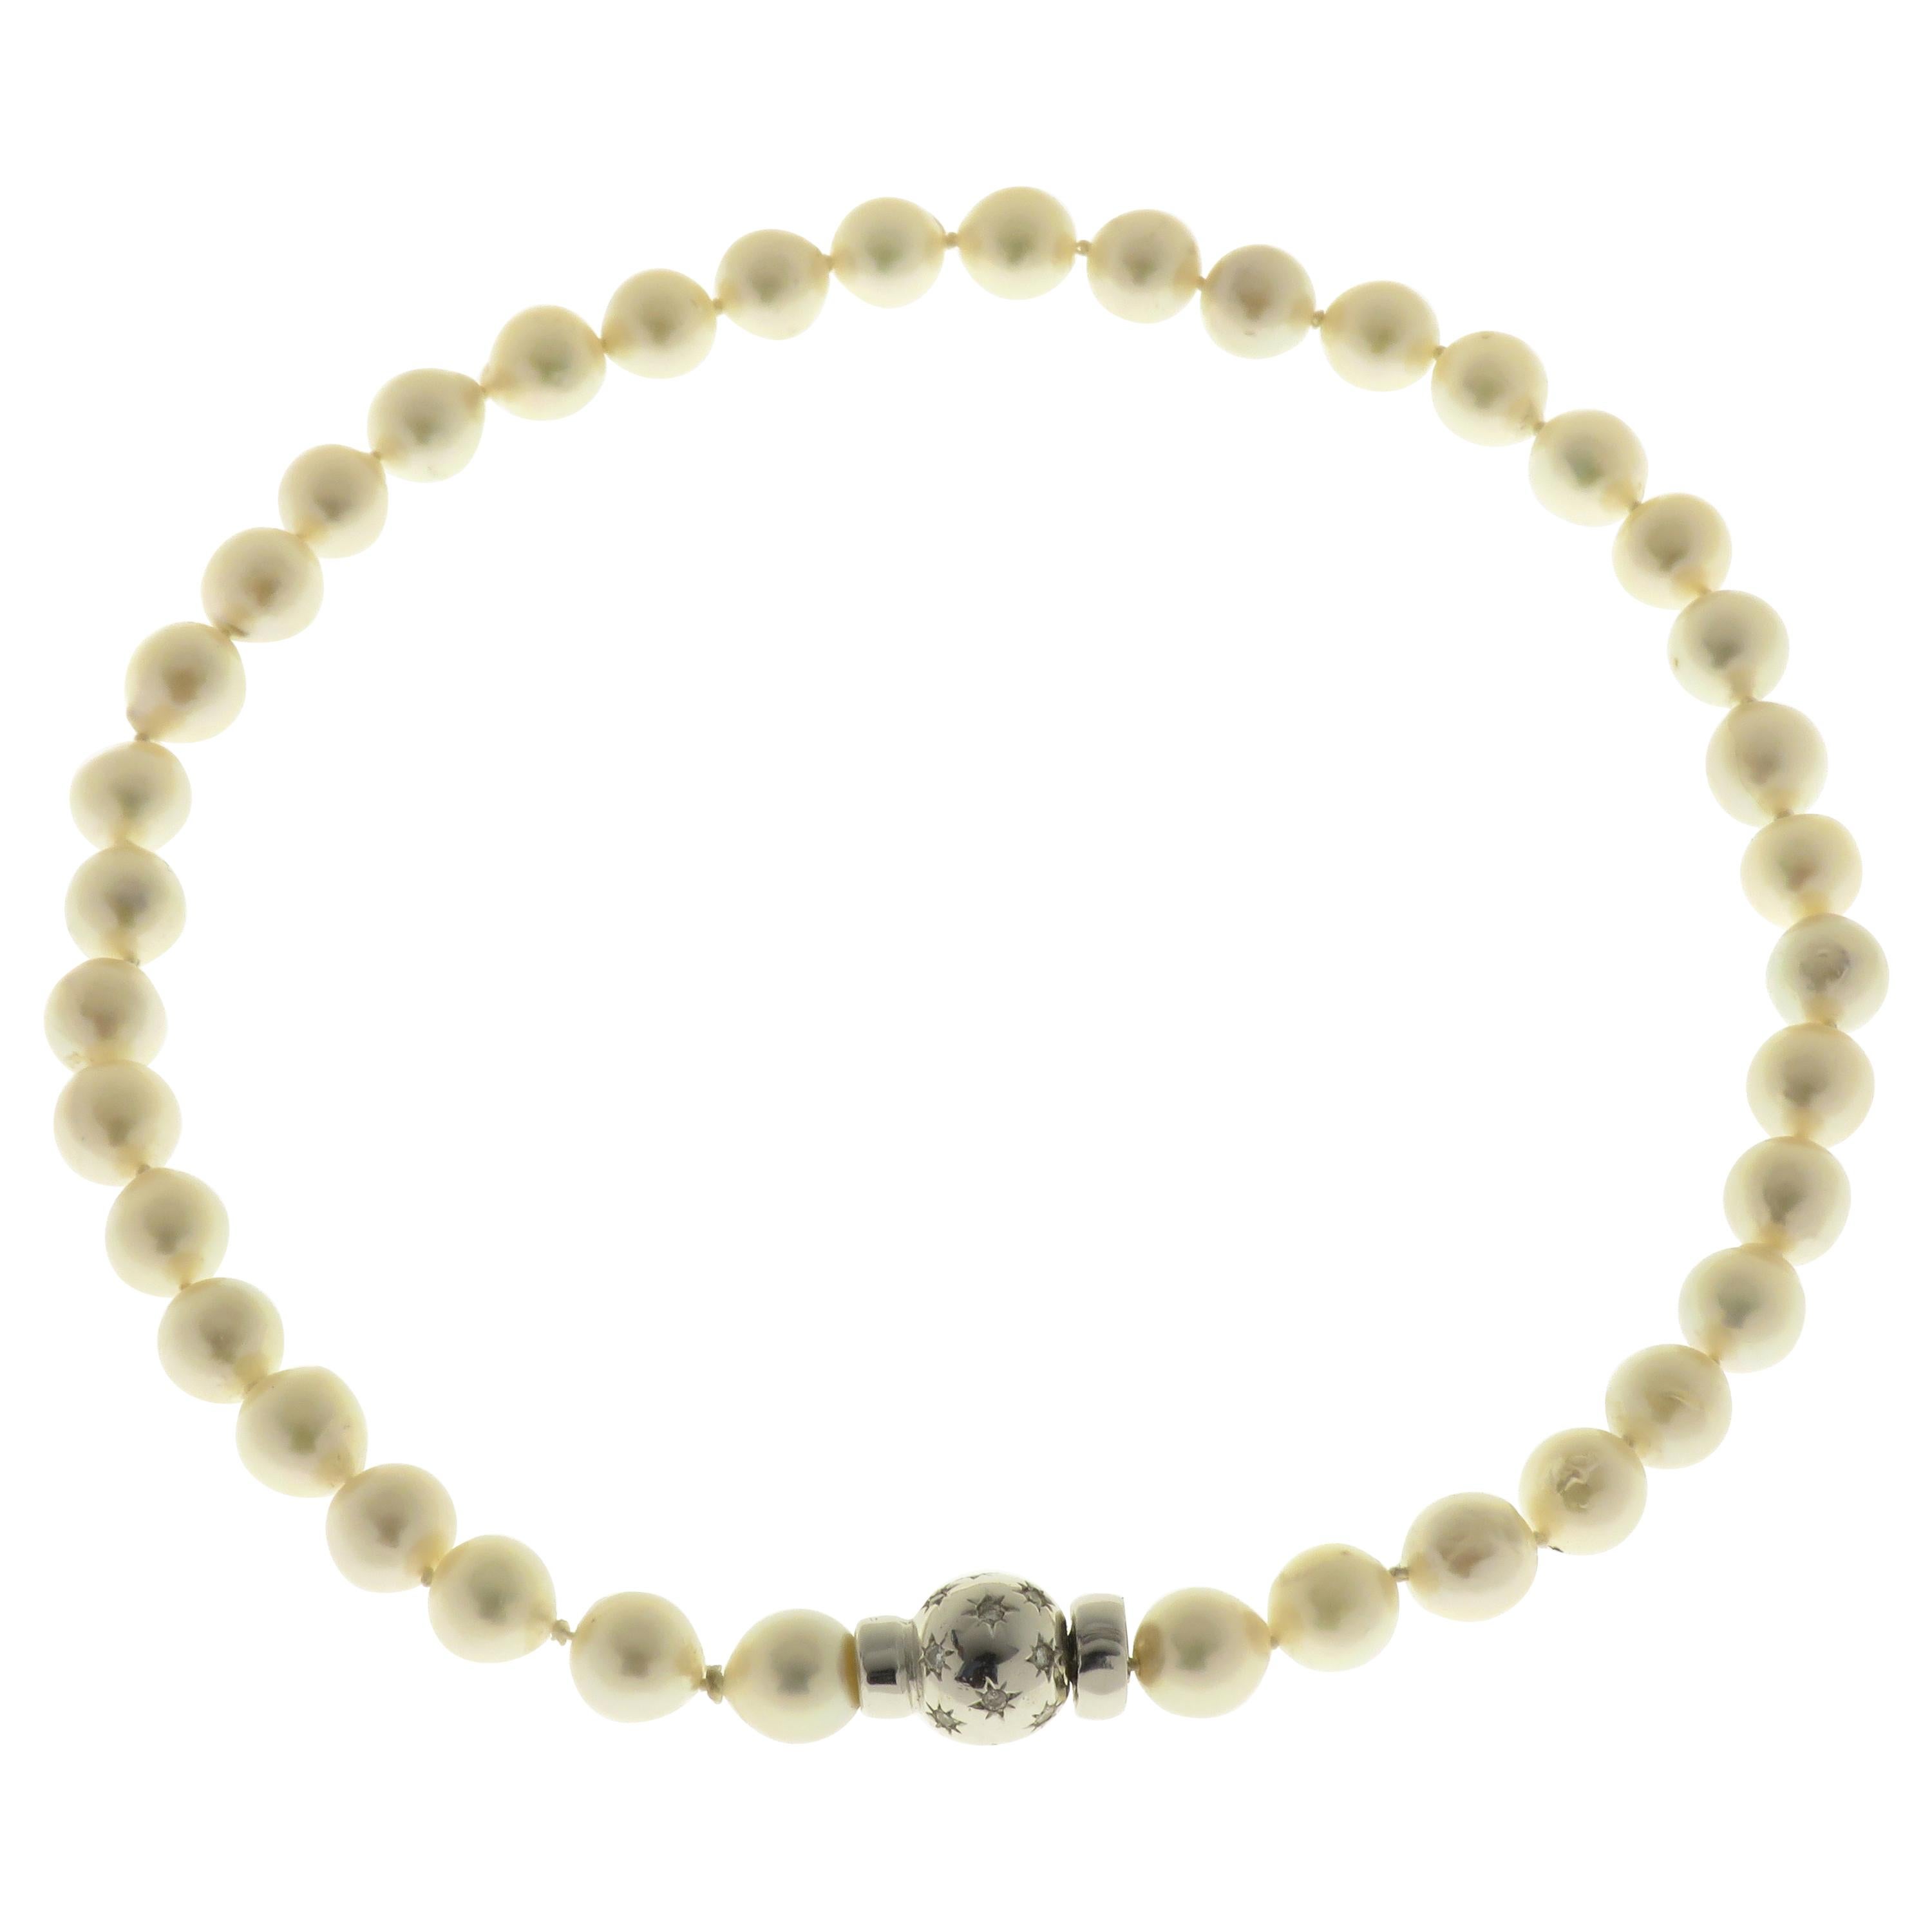 Akoya Pearls White Diamonds 18 Karat White Gold Necklace Handcrafted in Italy